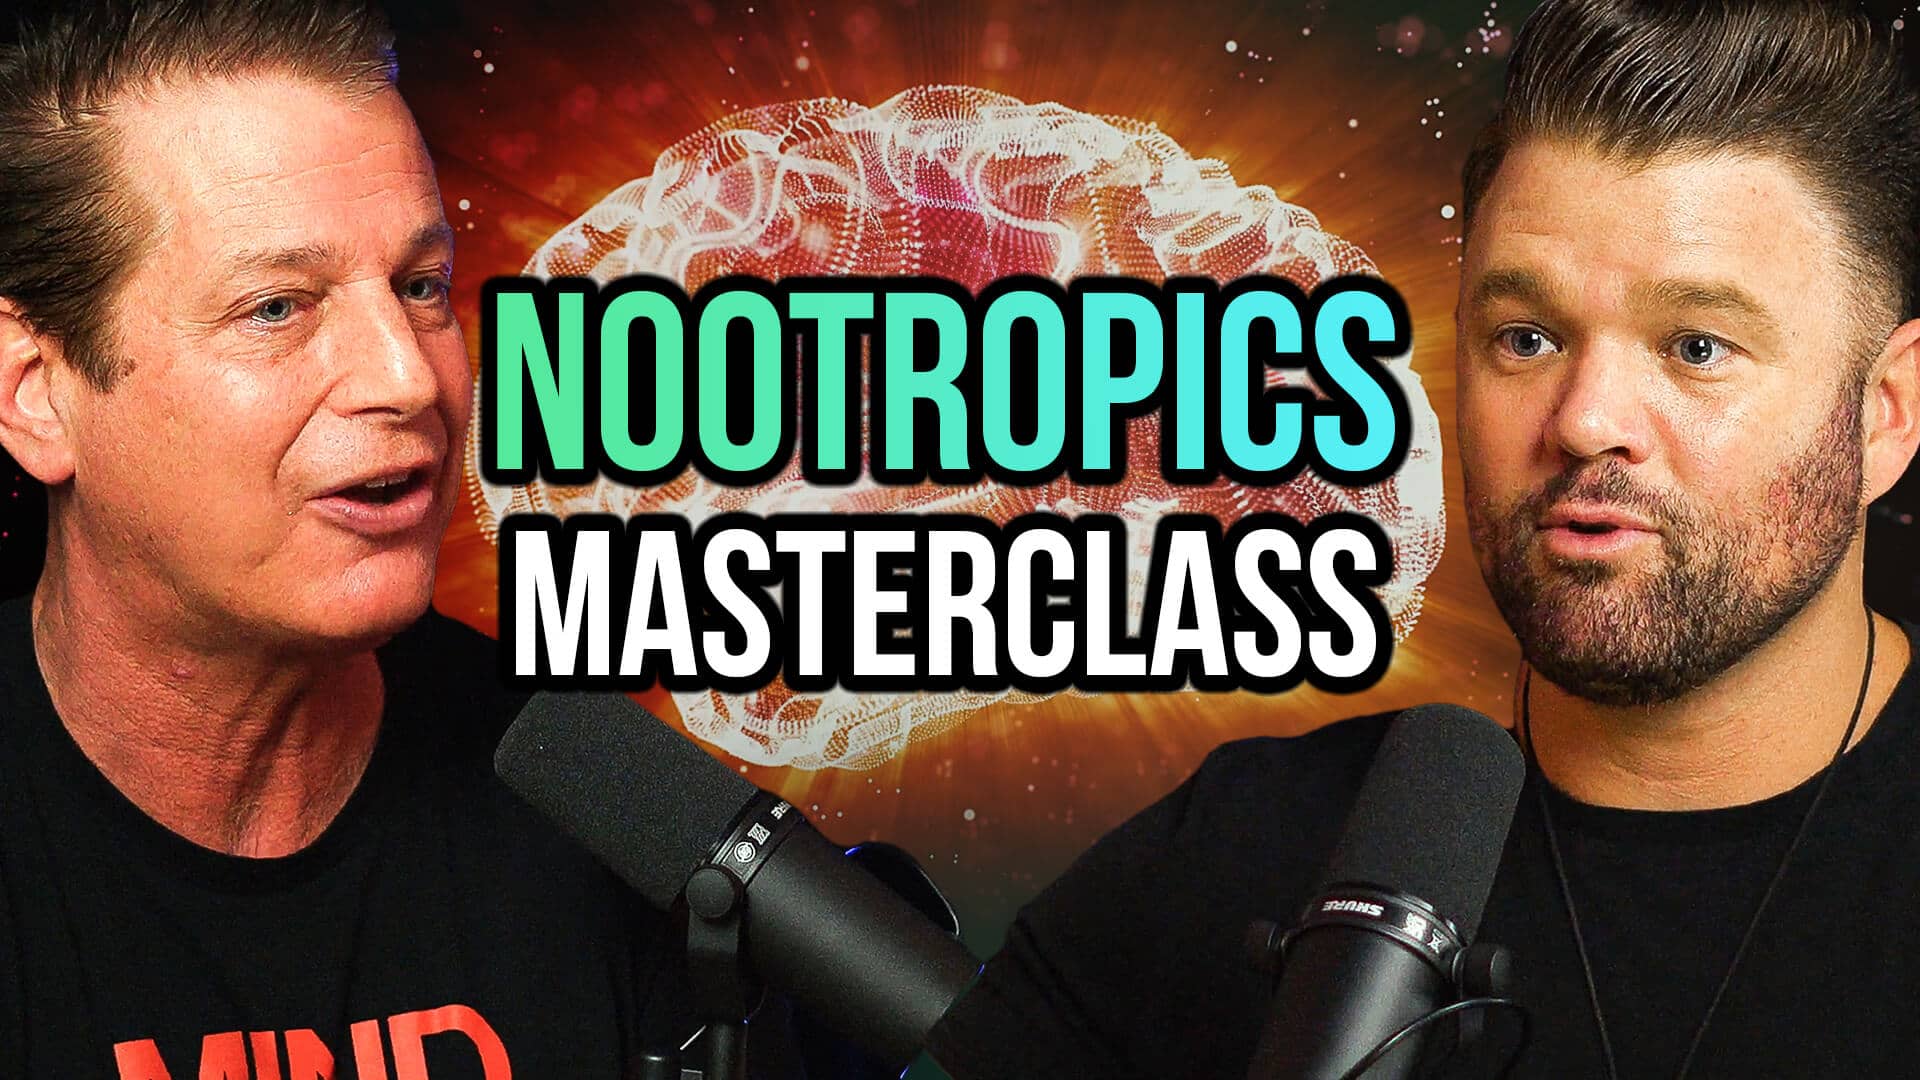 Nootropics Masterclass: How To Be Healthy, Fit + Wealthy With New Brain/Body Science (At Any Age)